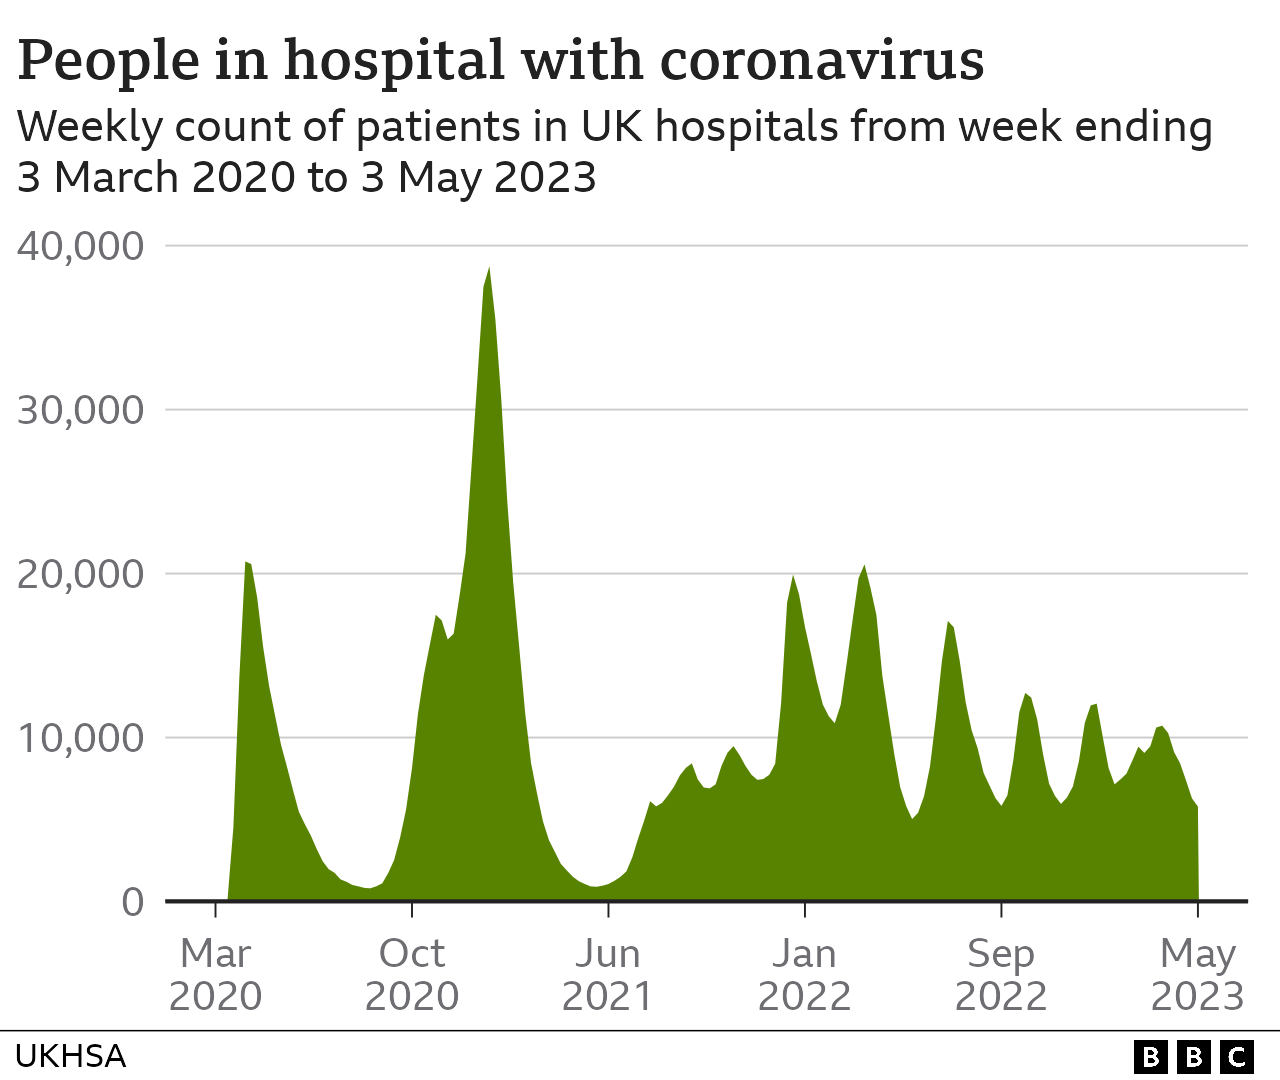 Chart showing weekly snapshots of patients in hospitals with coronavirus. There are two initial spikes in April 2020 and January 2021, with a peak of nearly 40,000 patients. This is followed by a fall, then a unsteady but reducing trend of rises and falls, with later peaks at about 20,000 patients